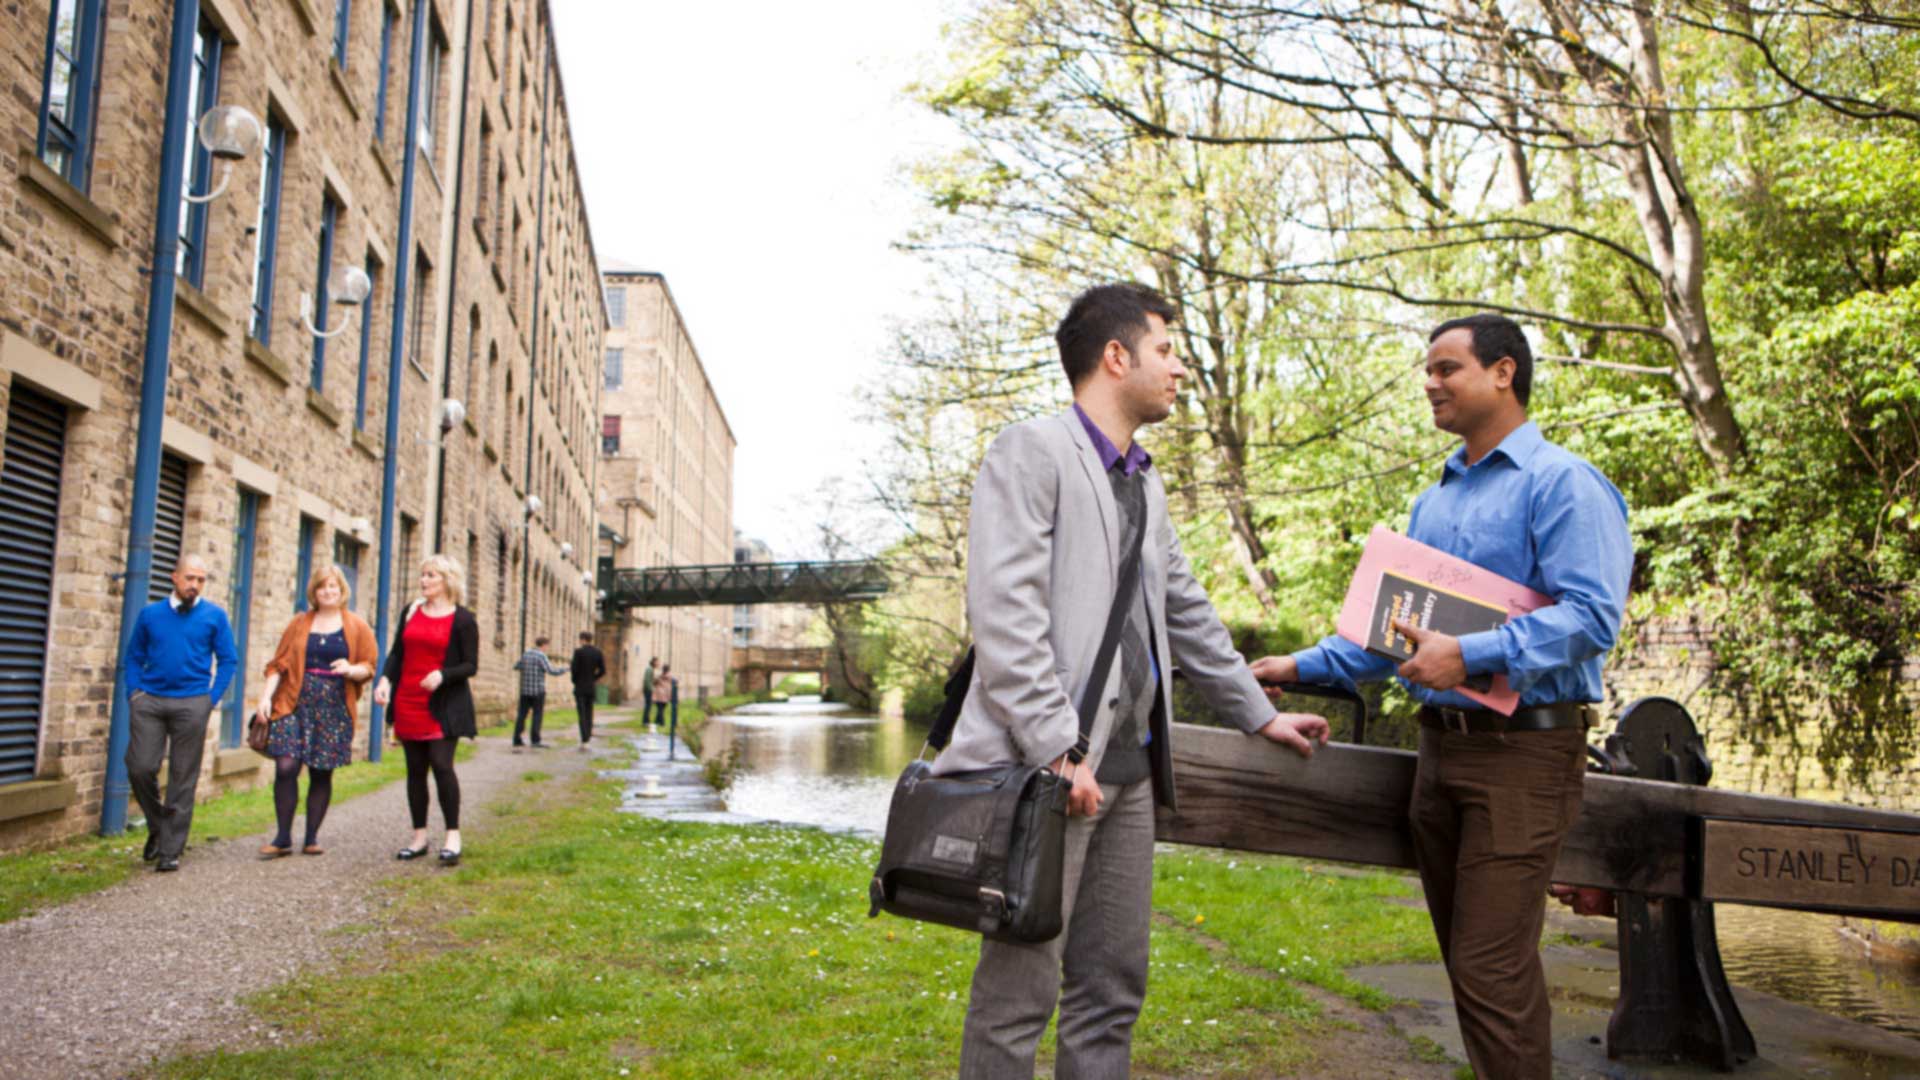 Two students stand chatting next to the canal behind one of the canalside buildings. Other students walk in the background.